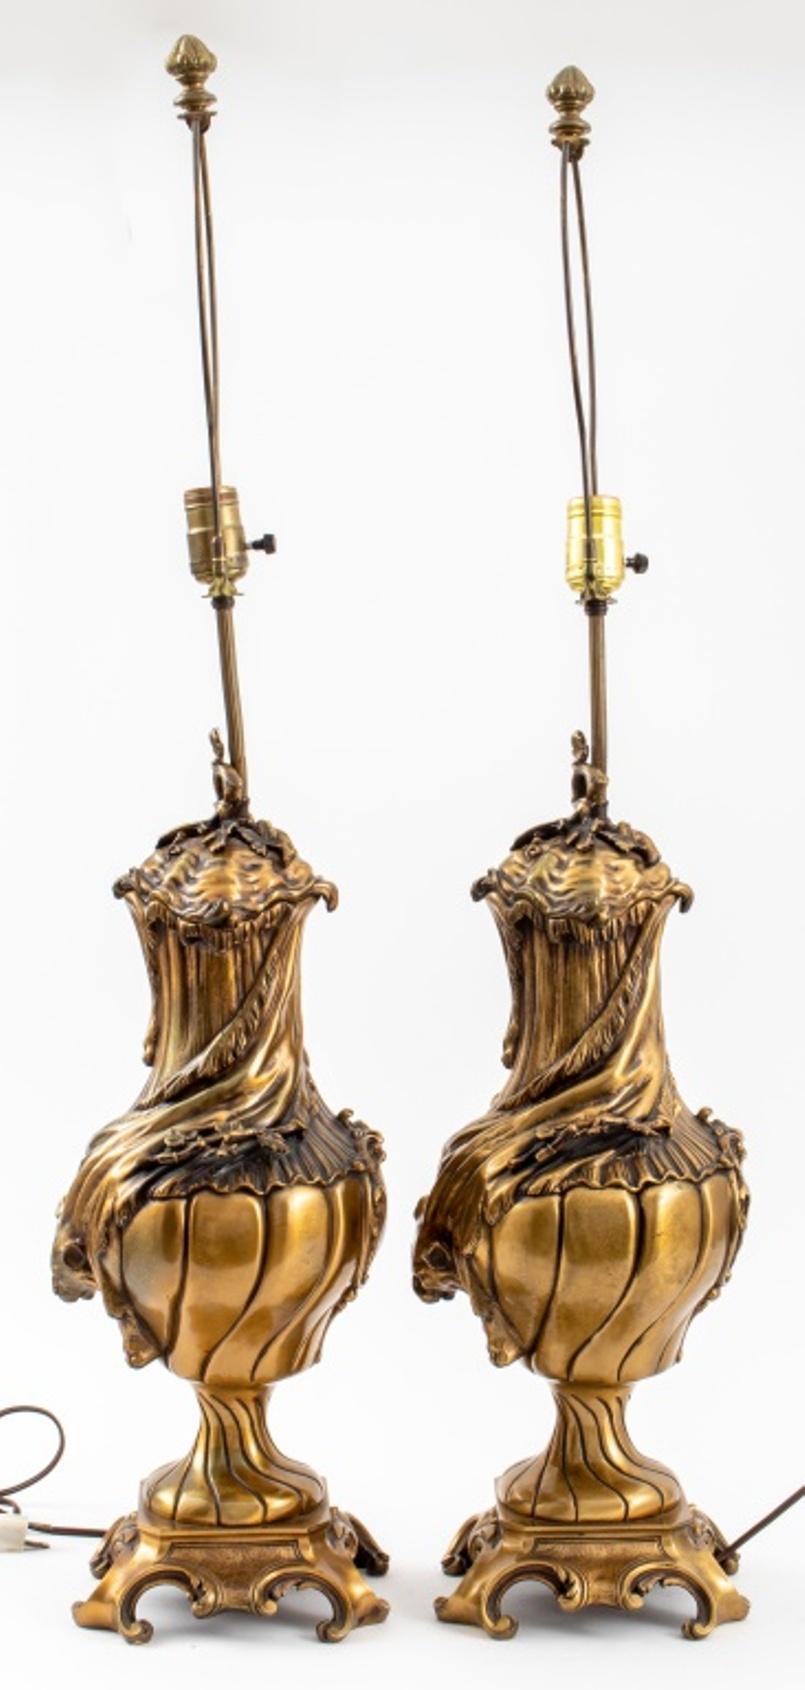 Italian Baroque Revival Style Bronze Lamps, Pair For Sale 1